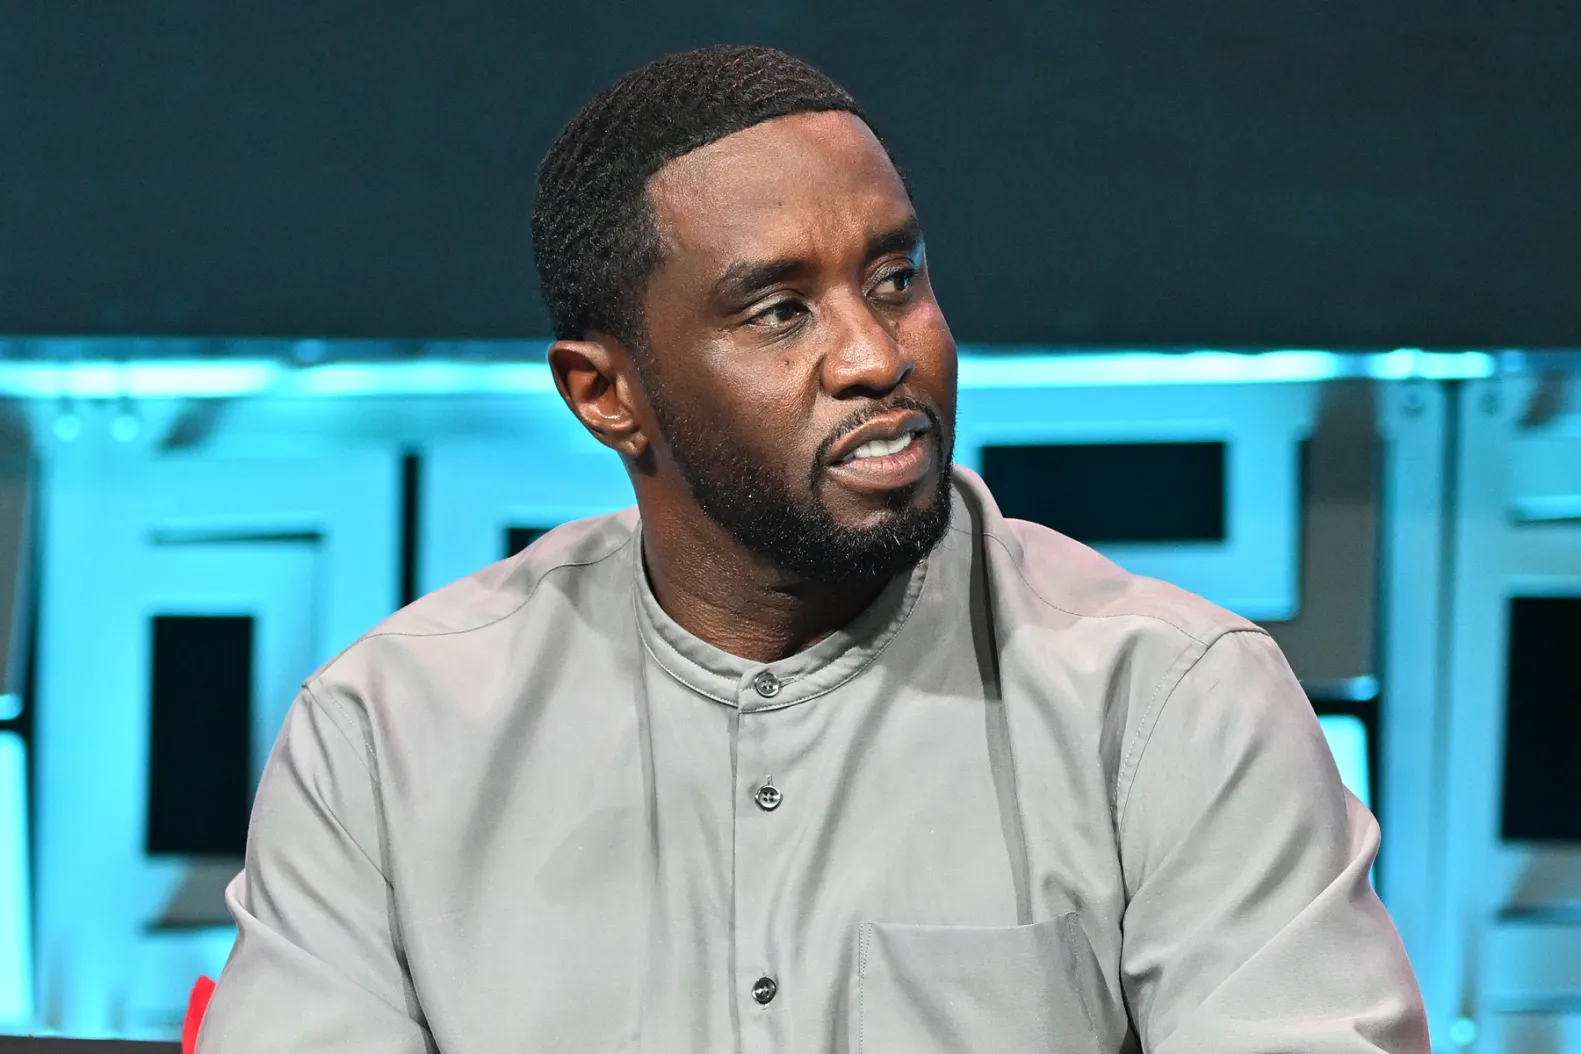 Sean 'Diddy' Combs accused of sexual assault by male producer